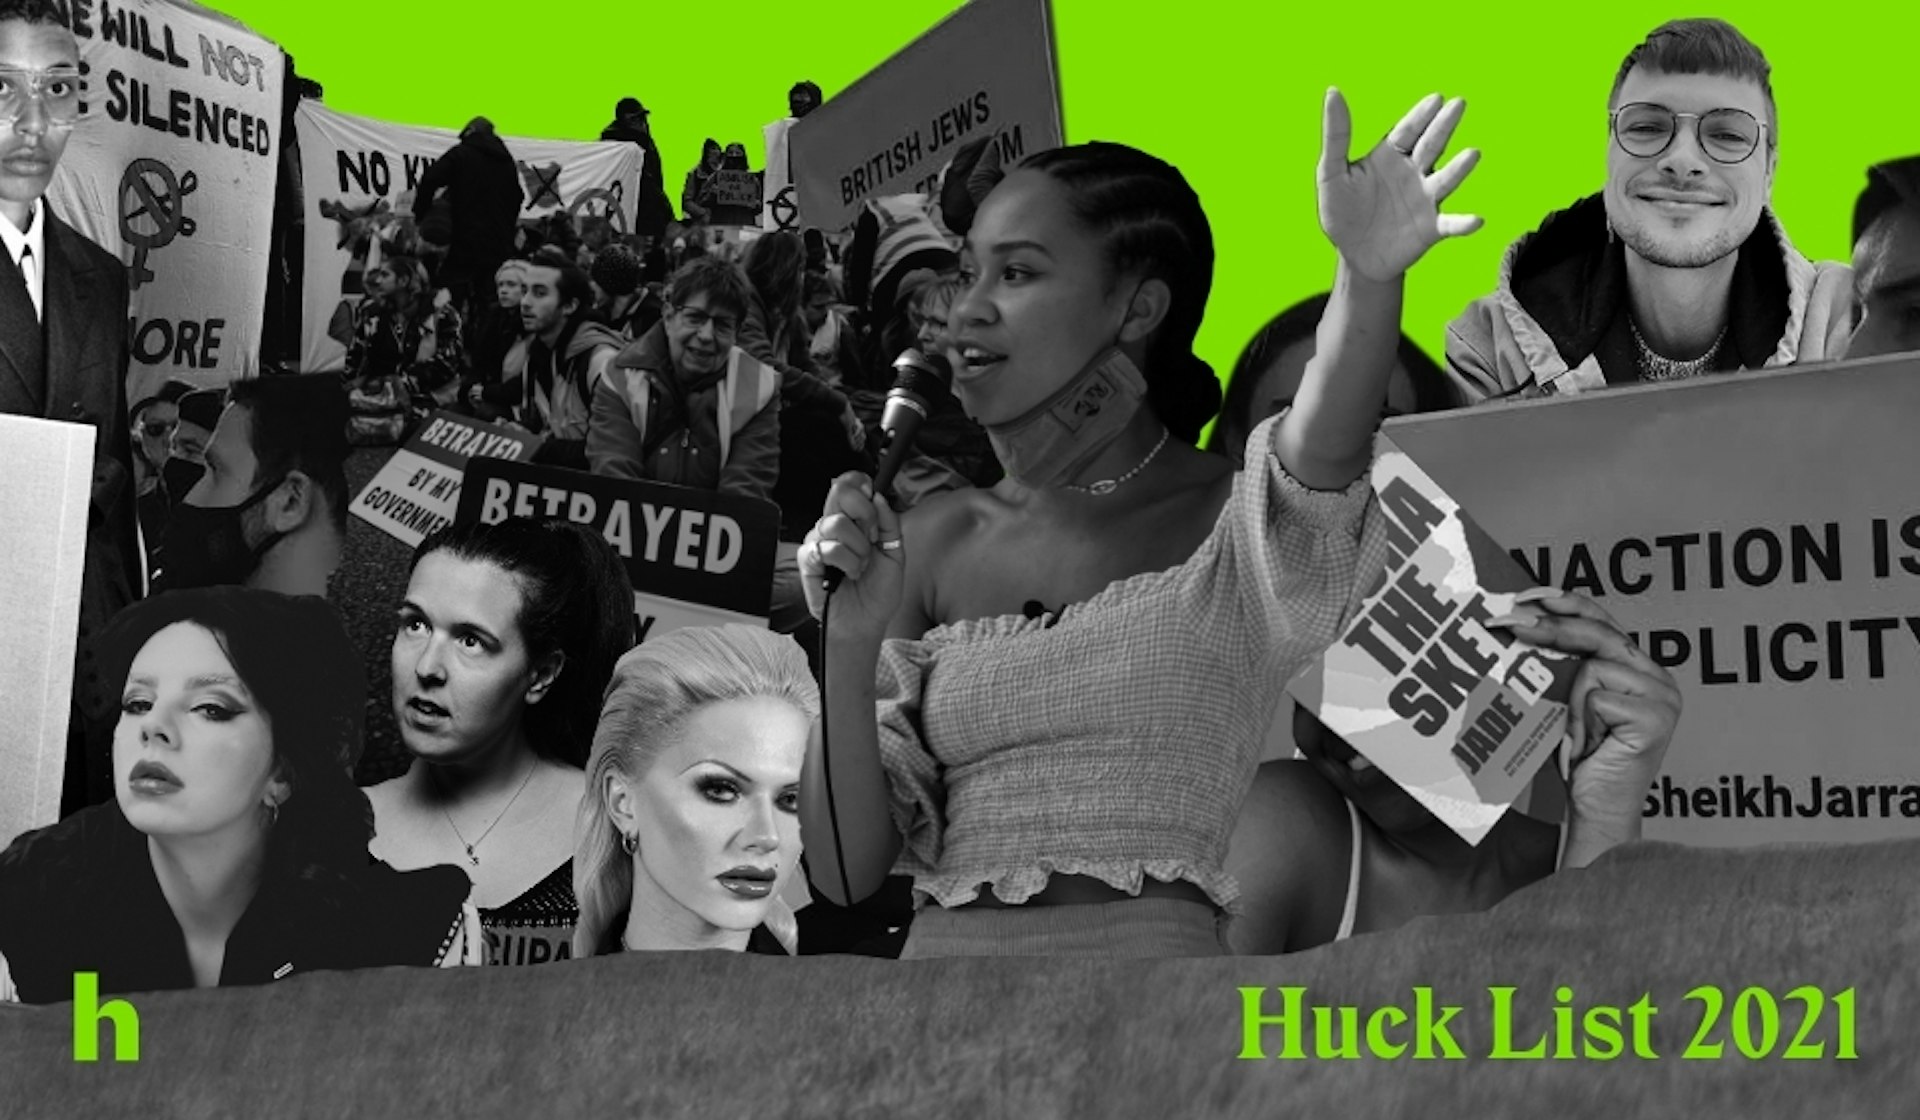 The Huck List: 20 for 2021